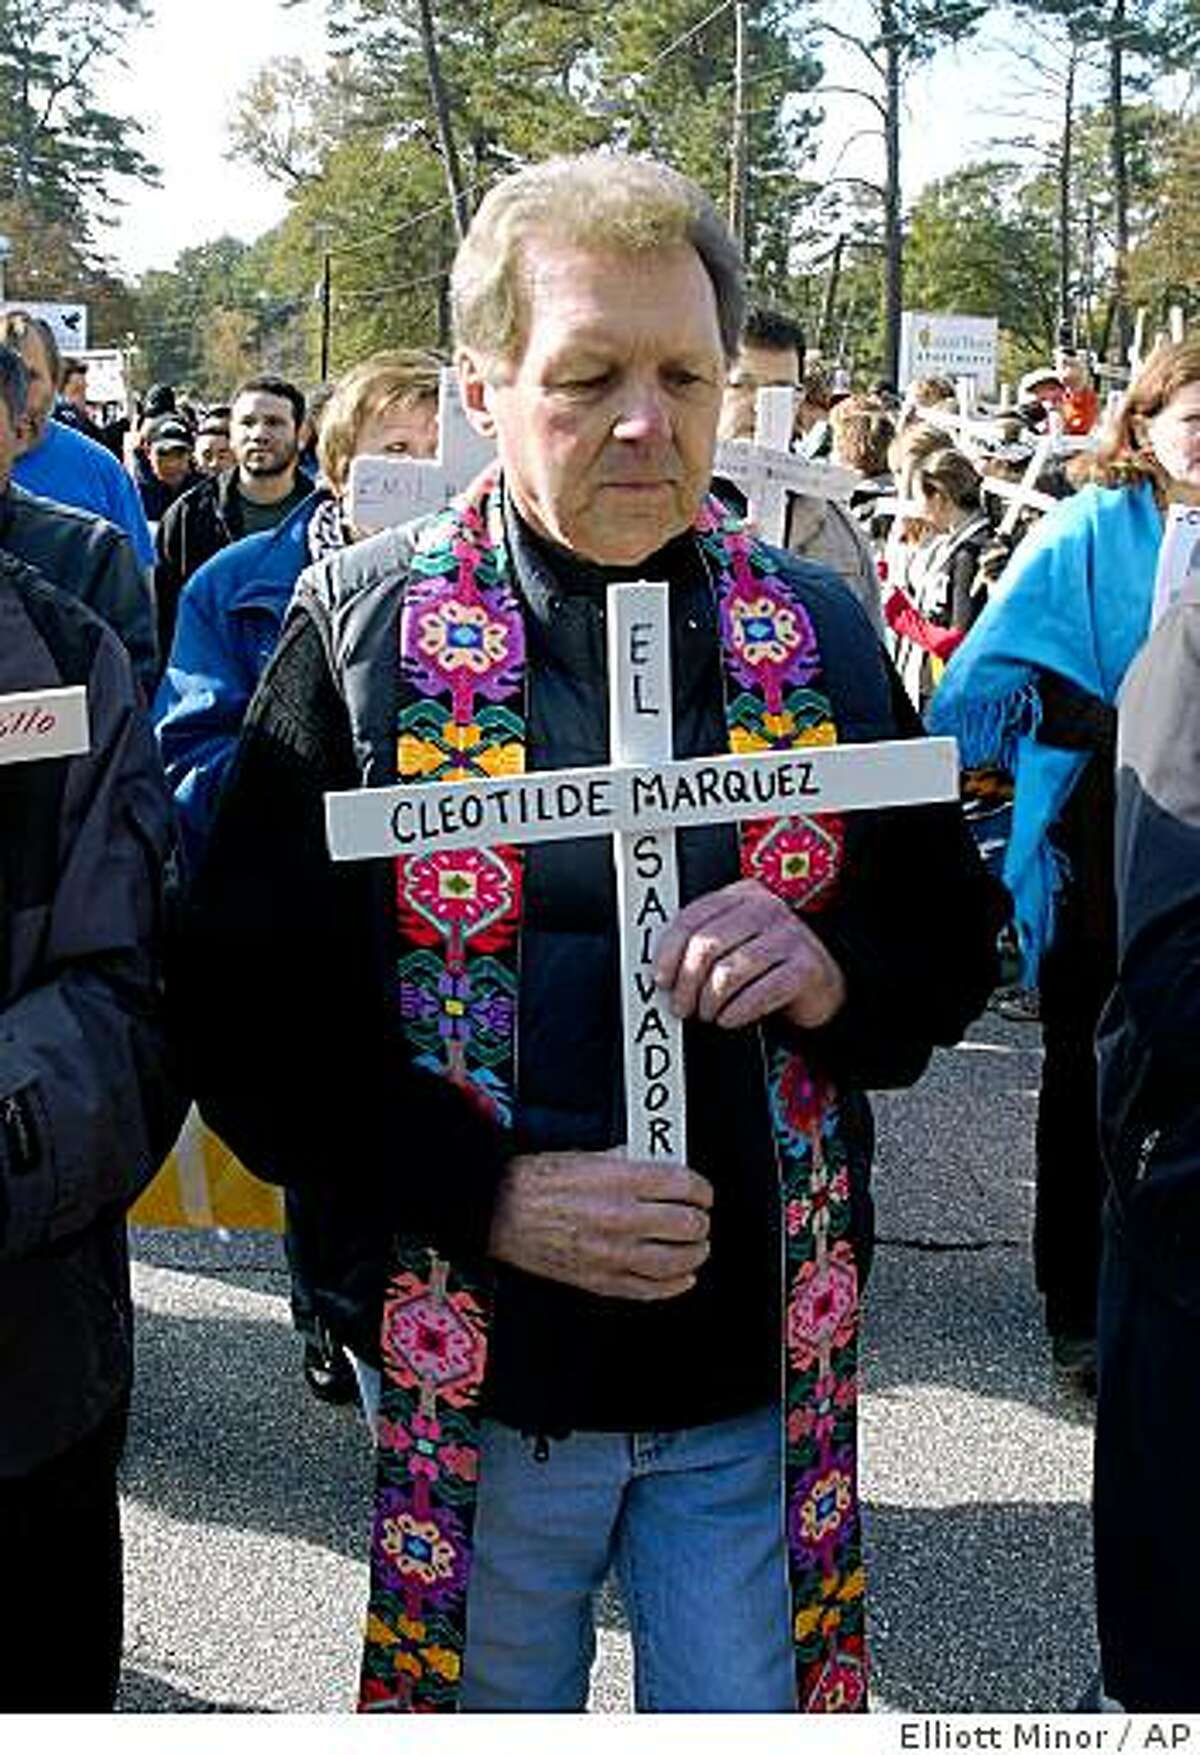 Roy Bourgeois, founder of School of Americas Watch, leads a procession Sunday, Nov. 23, 2008 in Columbus, Ga., to honor victims of alleged human rights abuses in Latin America. Bourgeois, a Maryknoll priest who has been leading the demonstrations outside a gate to Fort Benning since 1990, said his supporters view president-elect Barack Obama as the "president who stands for peace" and will request a meeting with him. (AP Photo/ Elliott Minor)